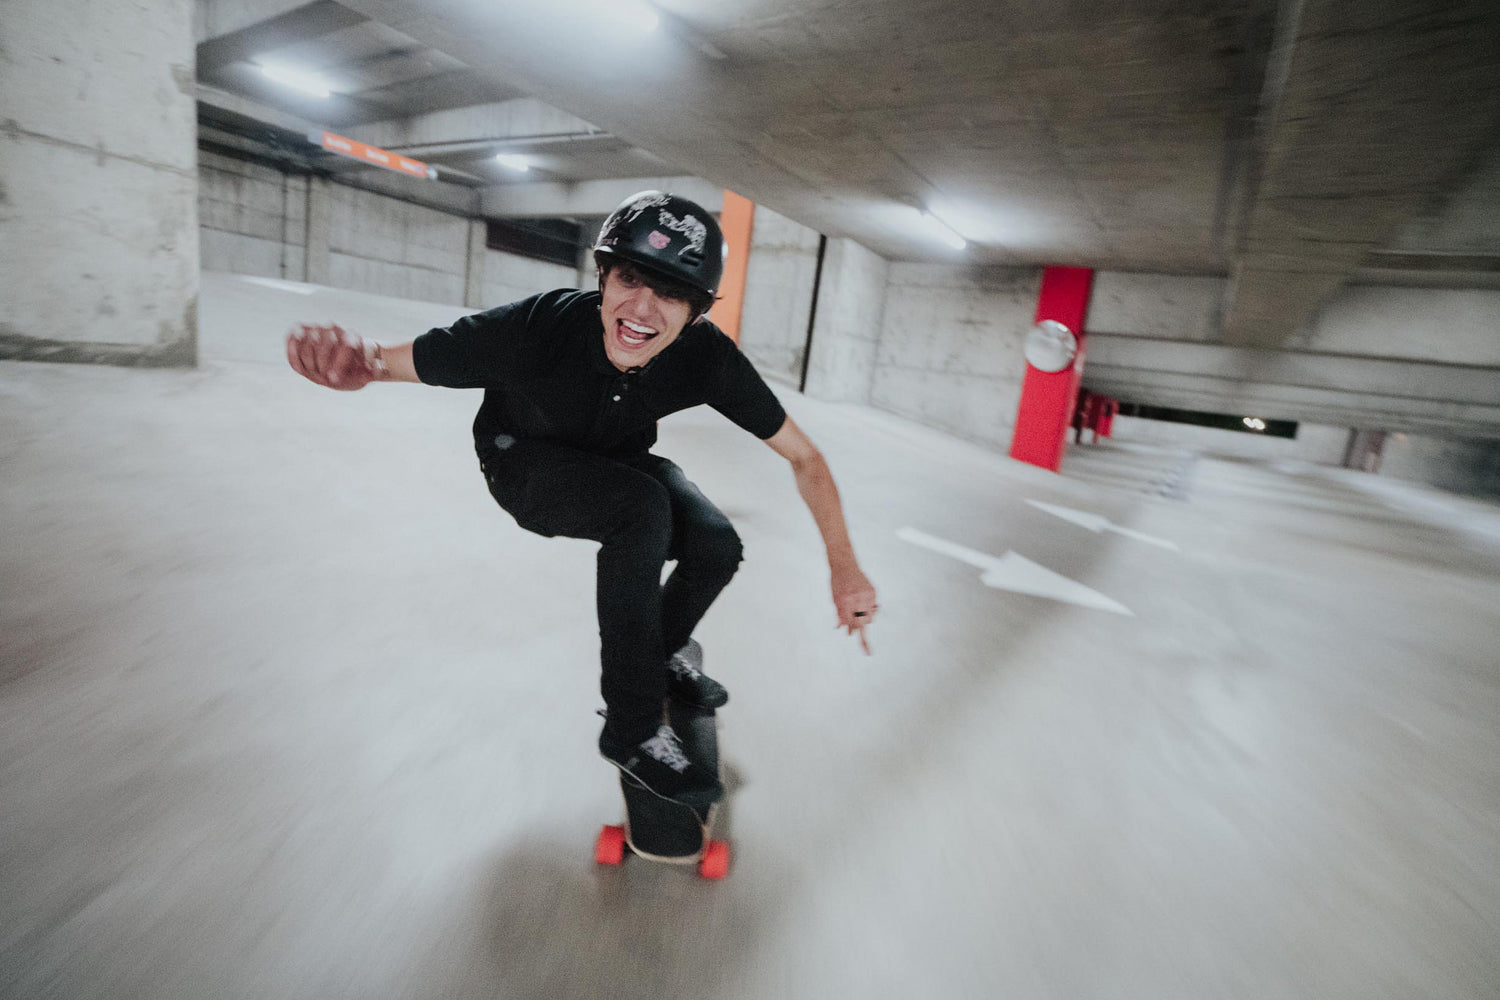 Meet the Midnight Longboarders Taking Over Downtown LA's Parking Garages